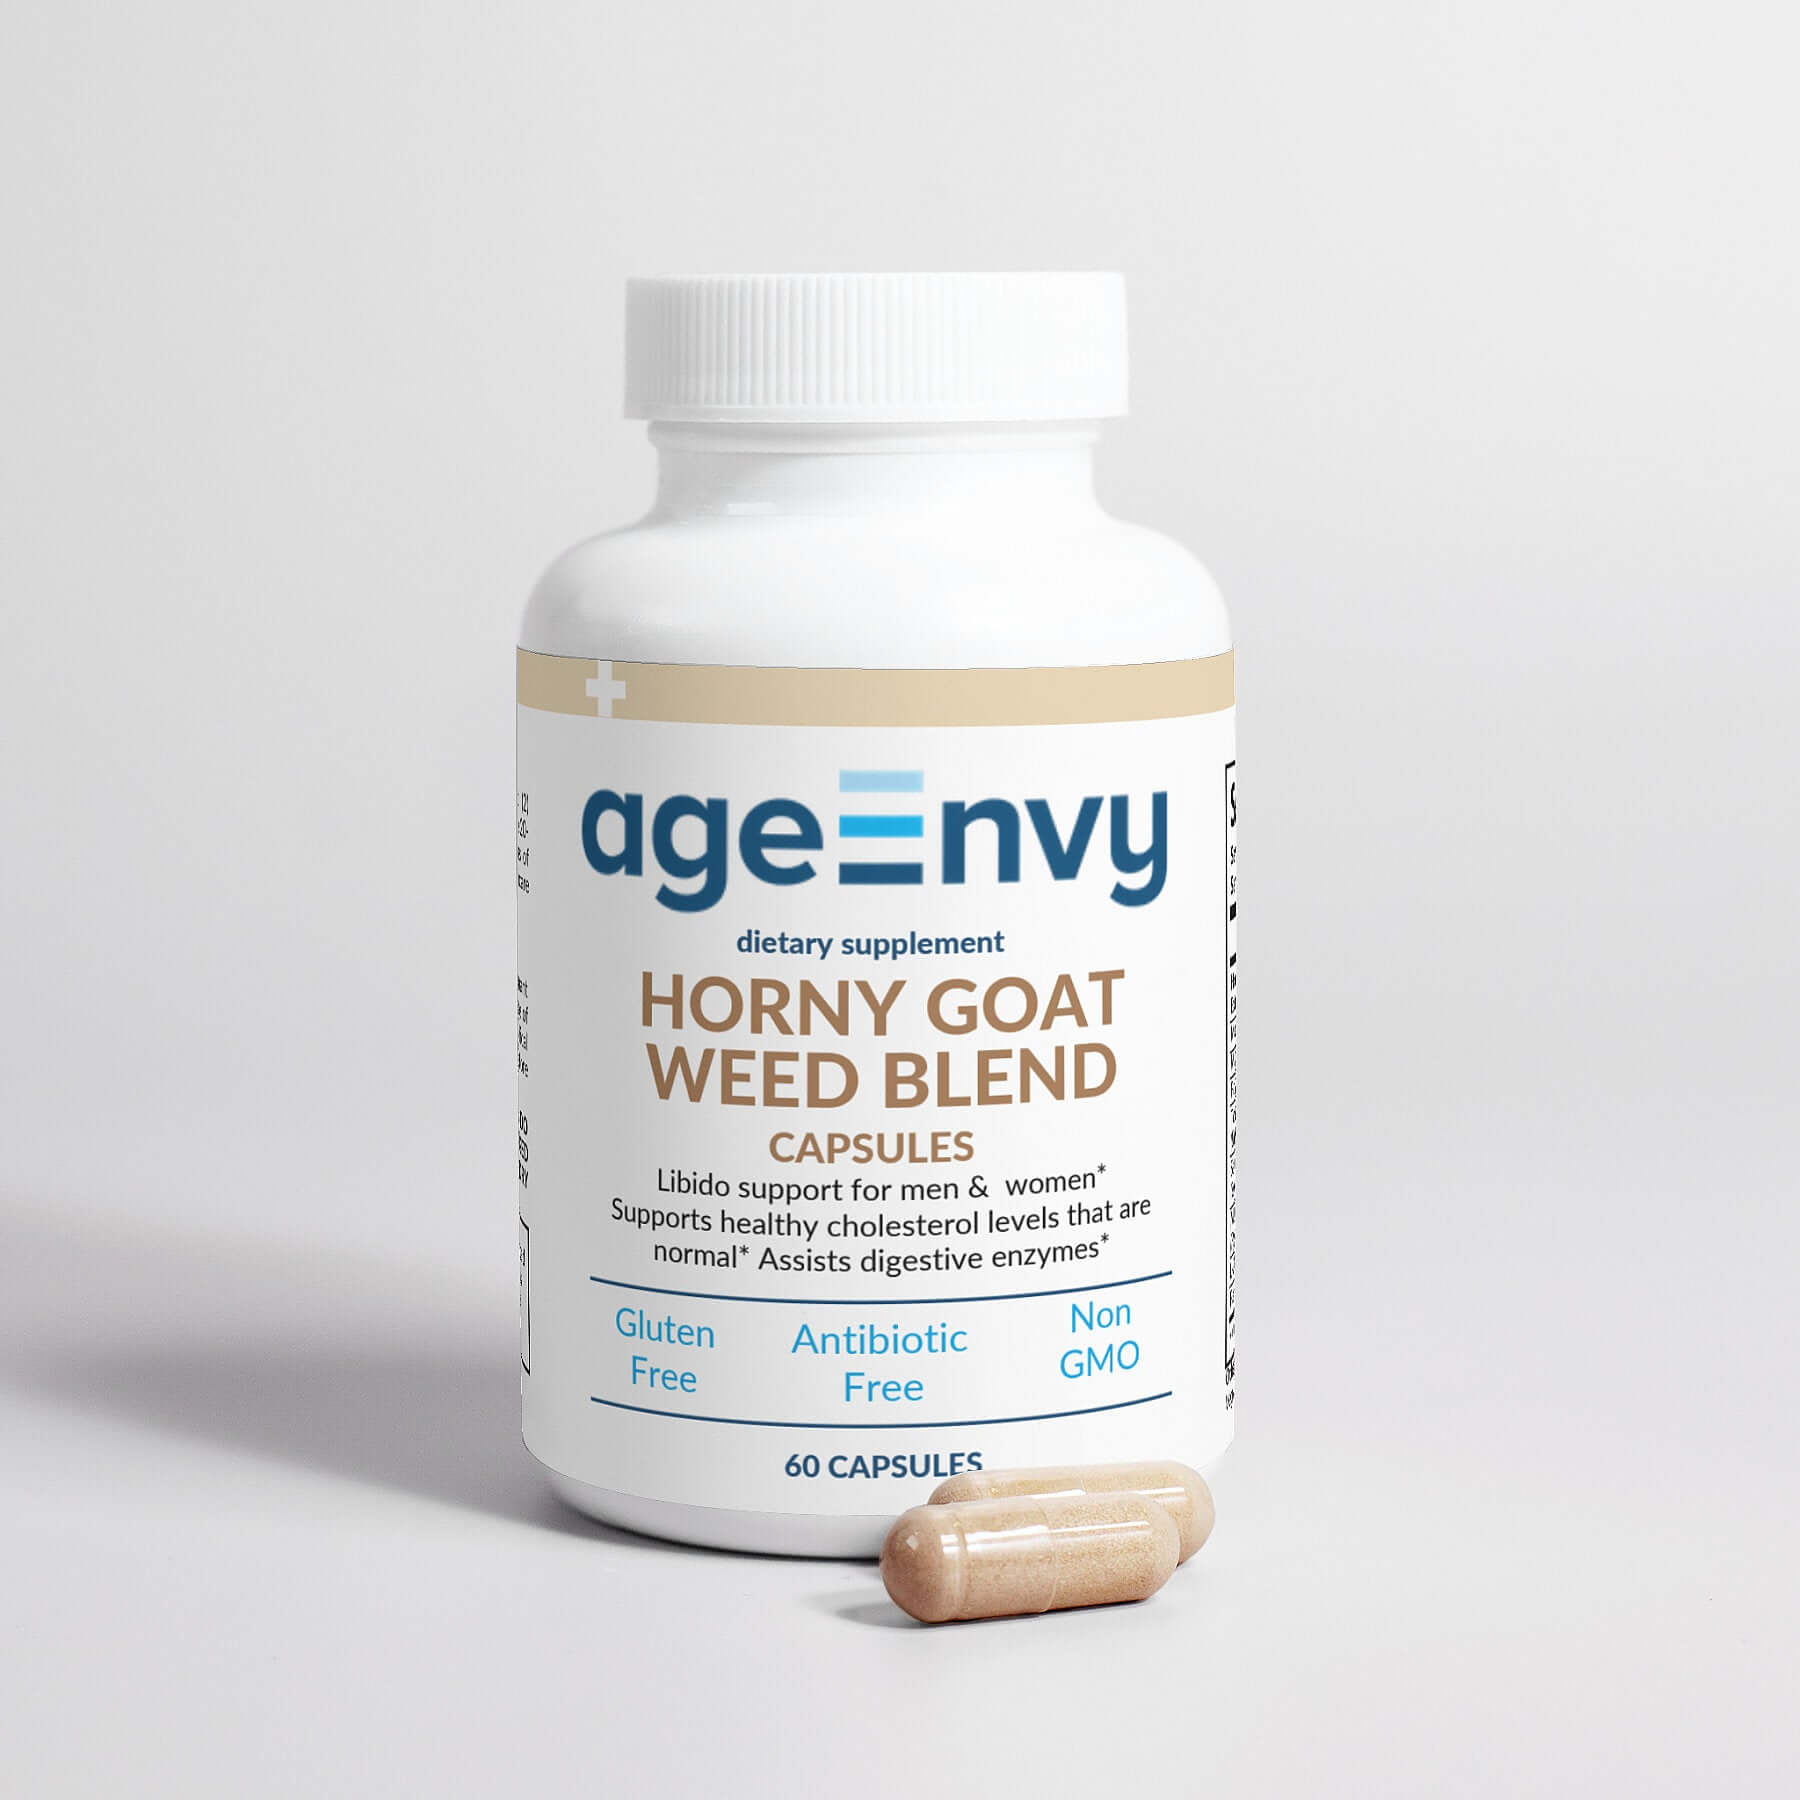 Horney Goat Weed Blend by AgeEnvy